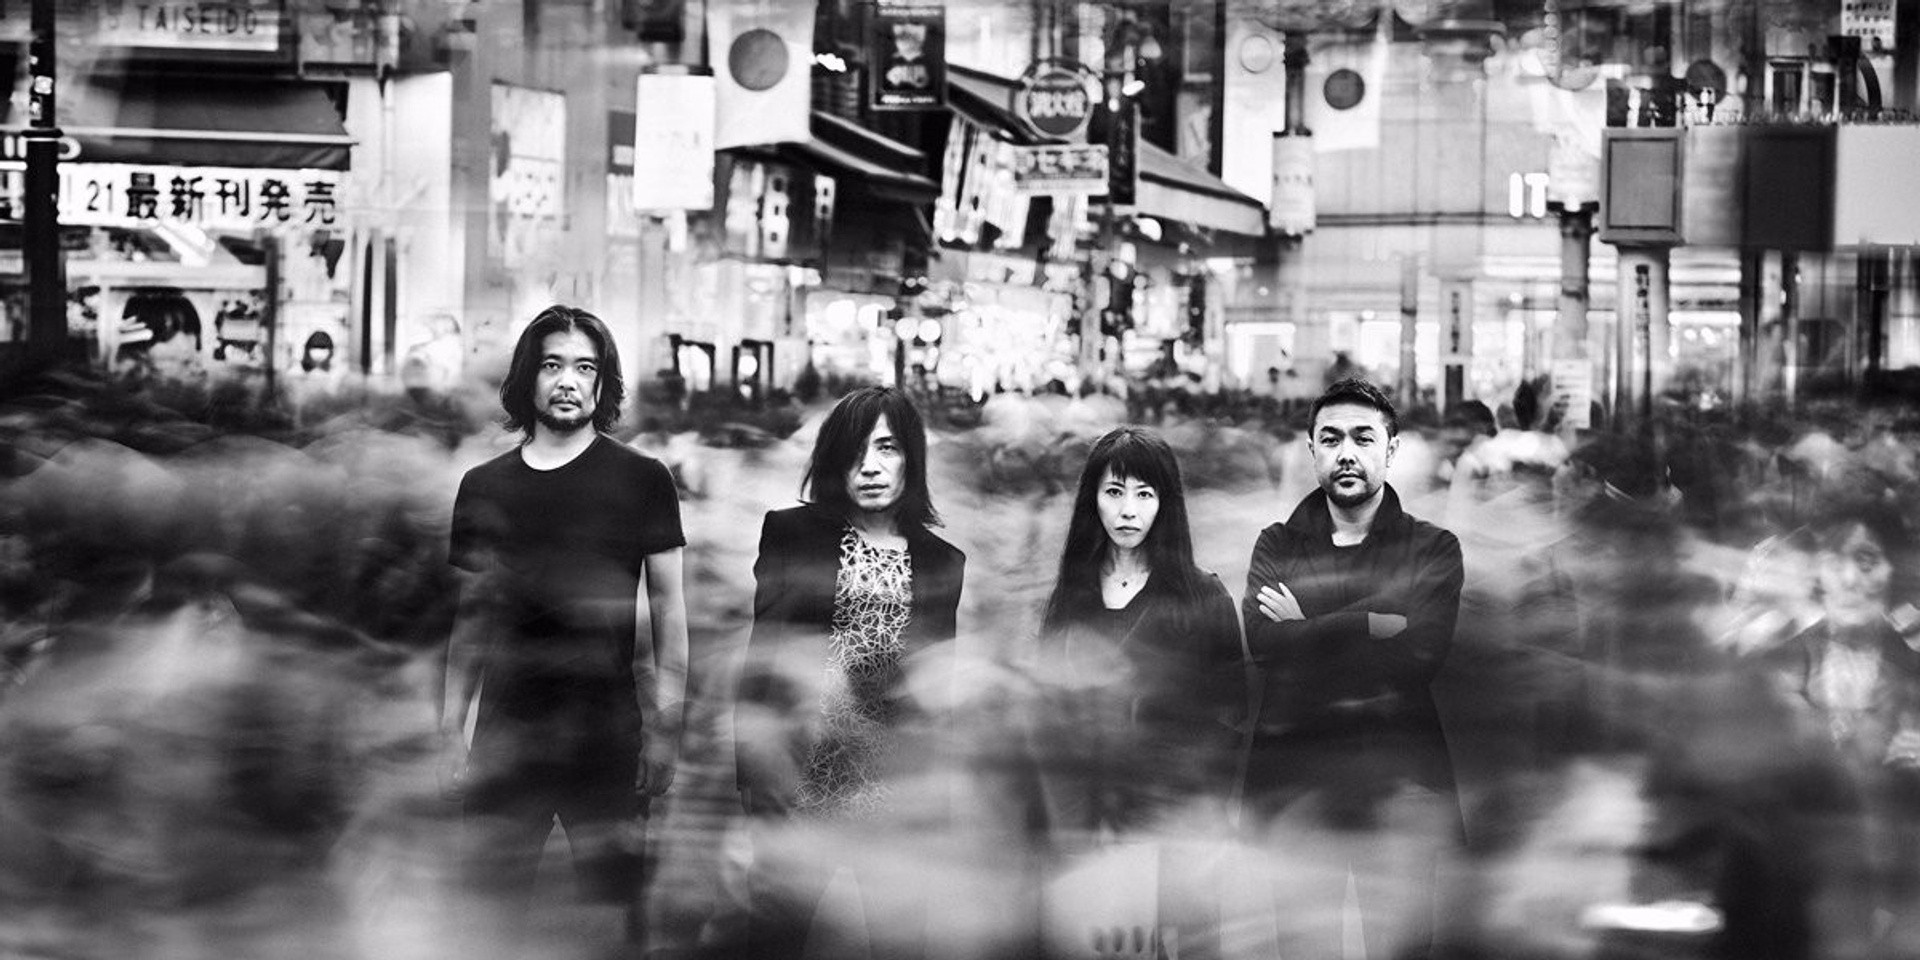 "Would you like us to visit?" Japanese post-rock act MONO asks Filipino fans